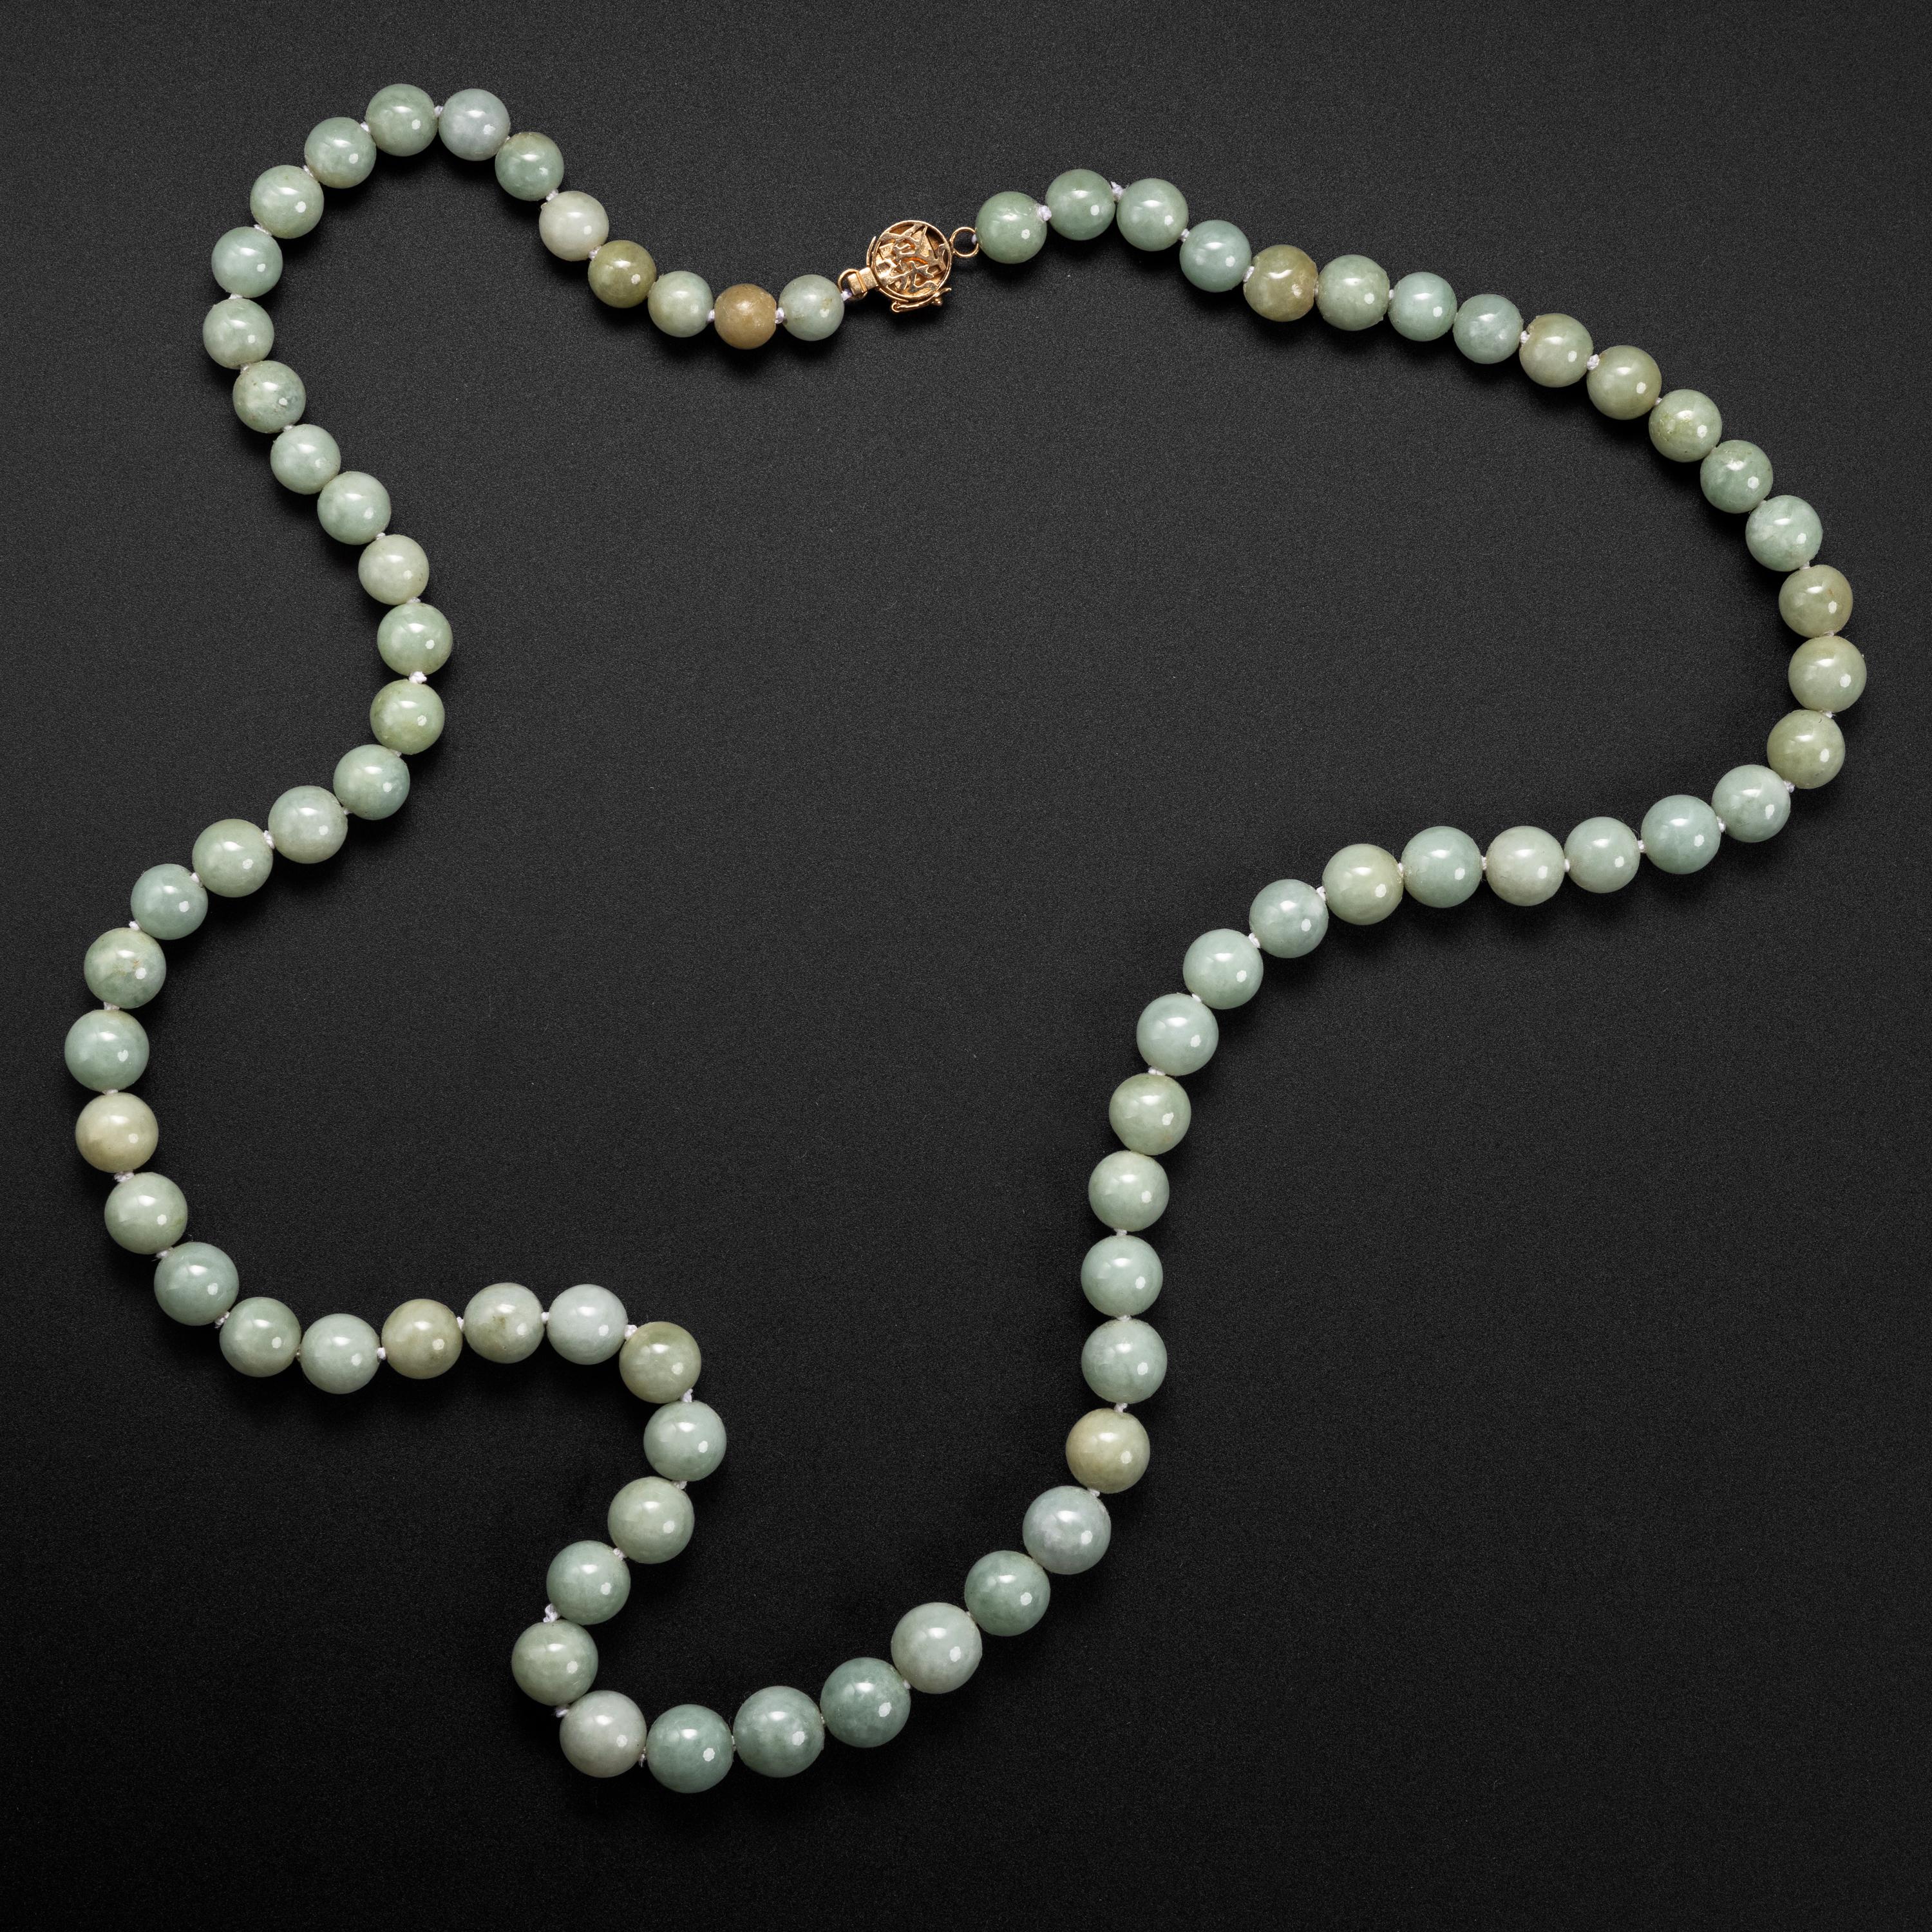 In soothing tones of light green and pale honey, this circa 1970s necklace is a statement of muted sophistication. The necklace measures 27